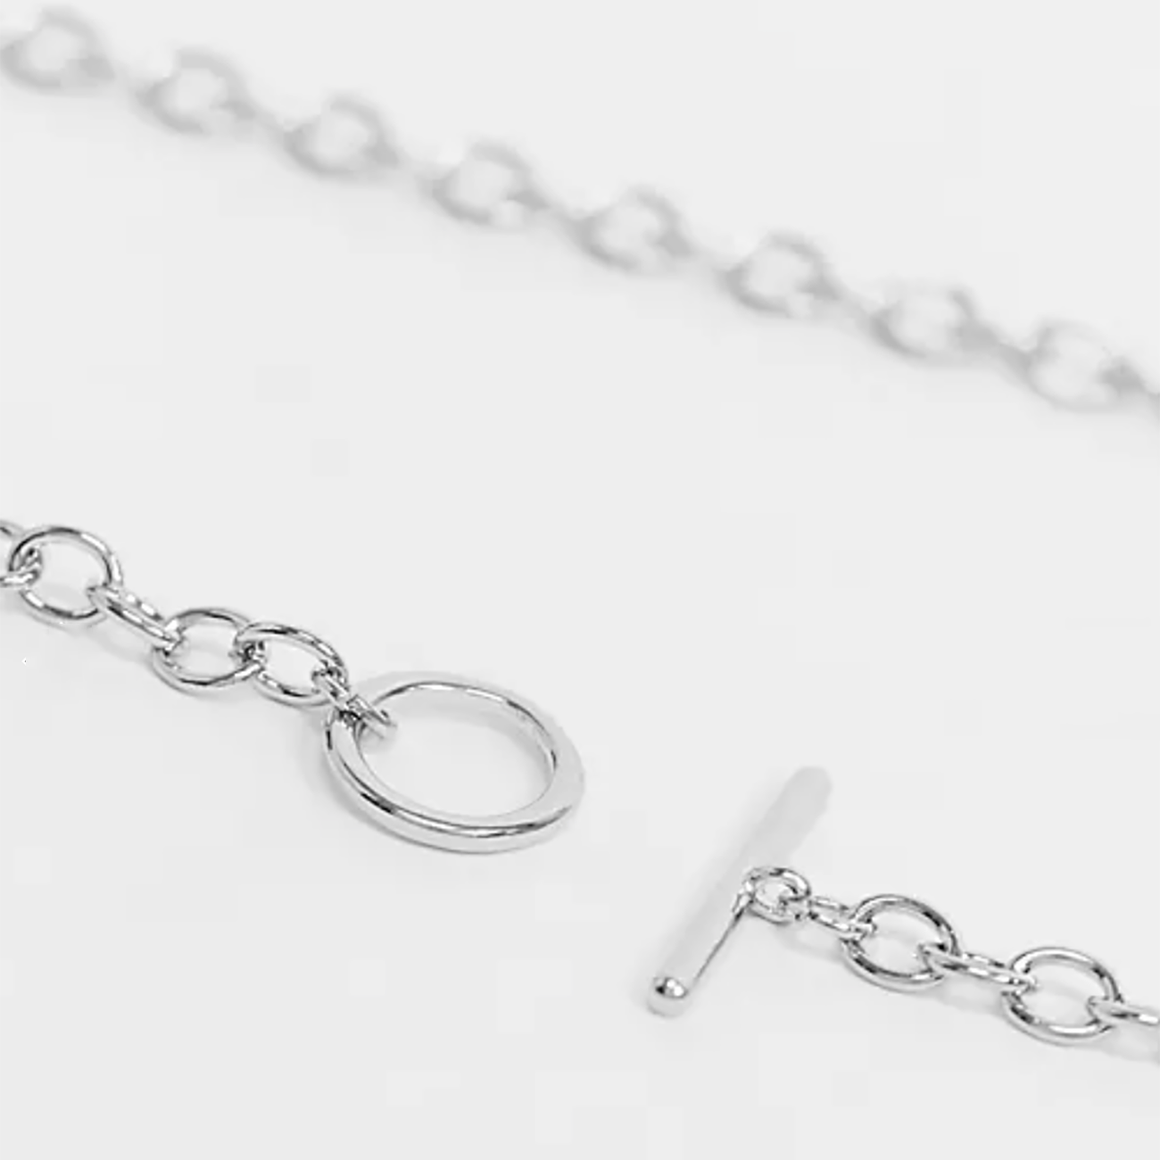 54 FLORAL T BAR PENDANT OVAL NECKLACE CHAIN - SILVER